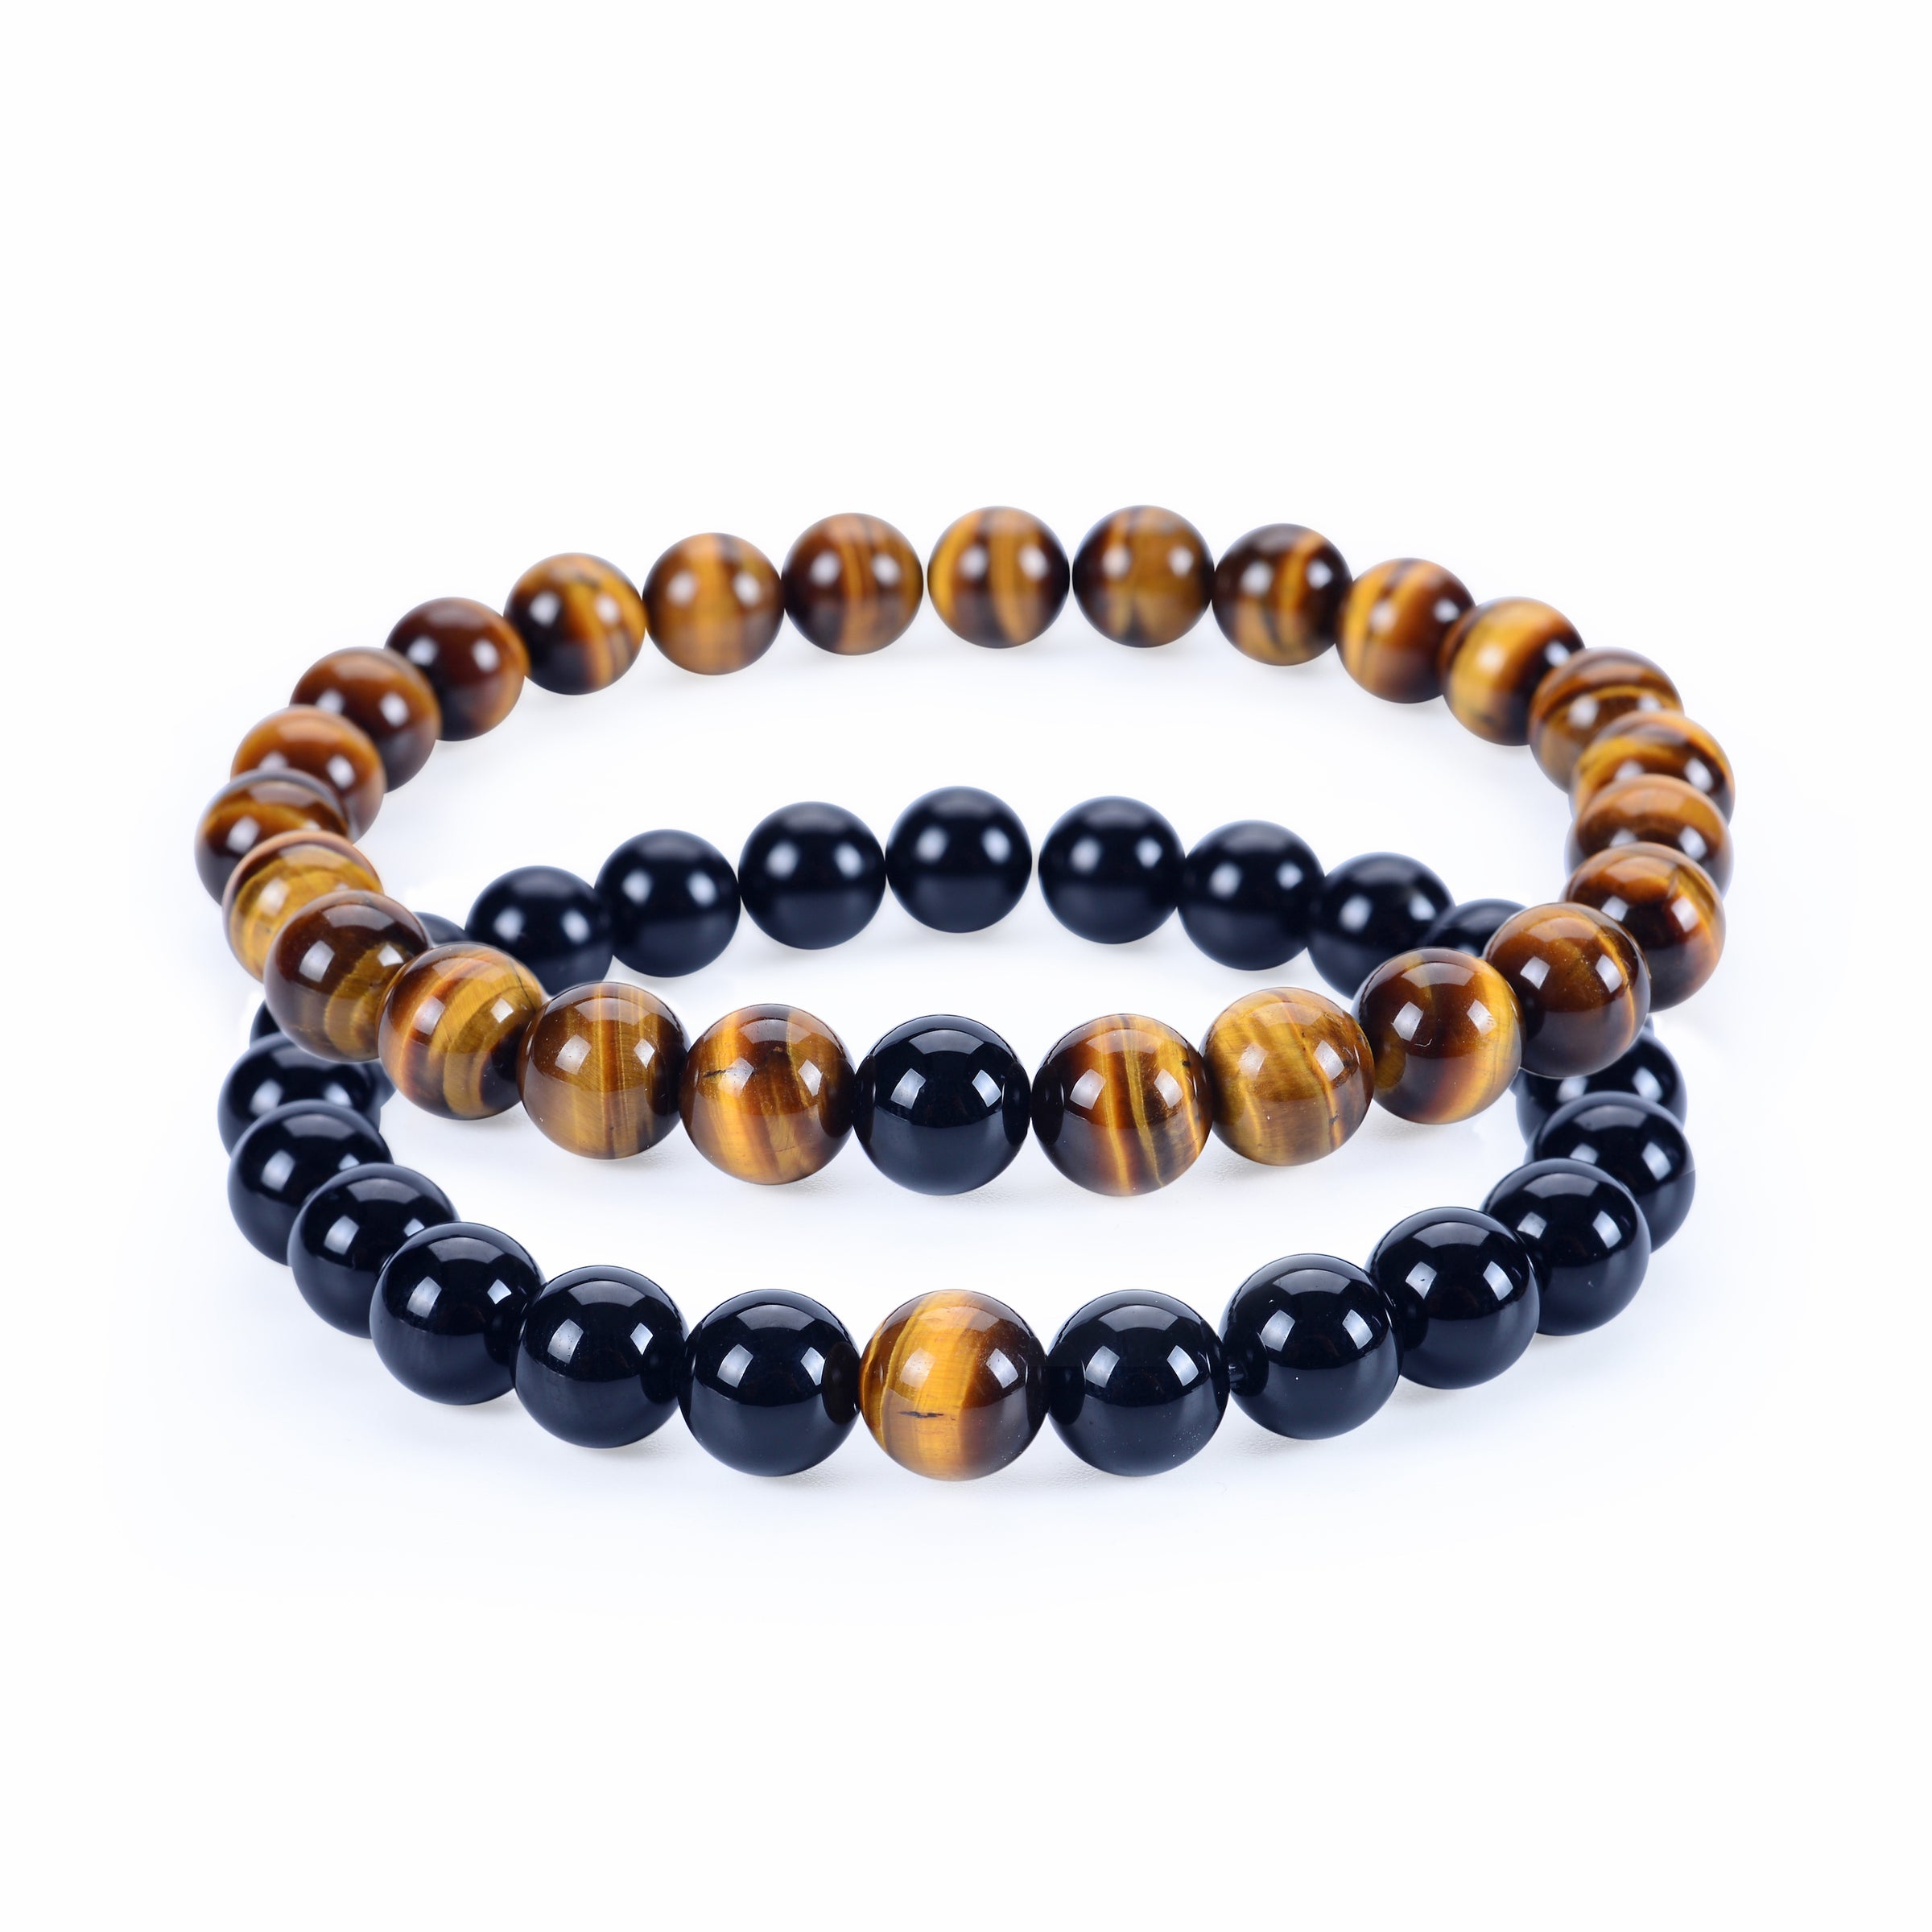 Couples Distance Stretch Bracelets | 8mm Beads (Tiger's Eye and Black Agate)